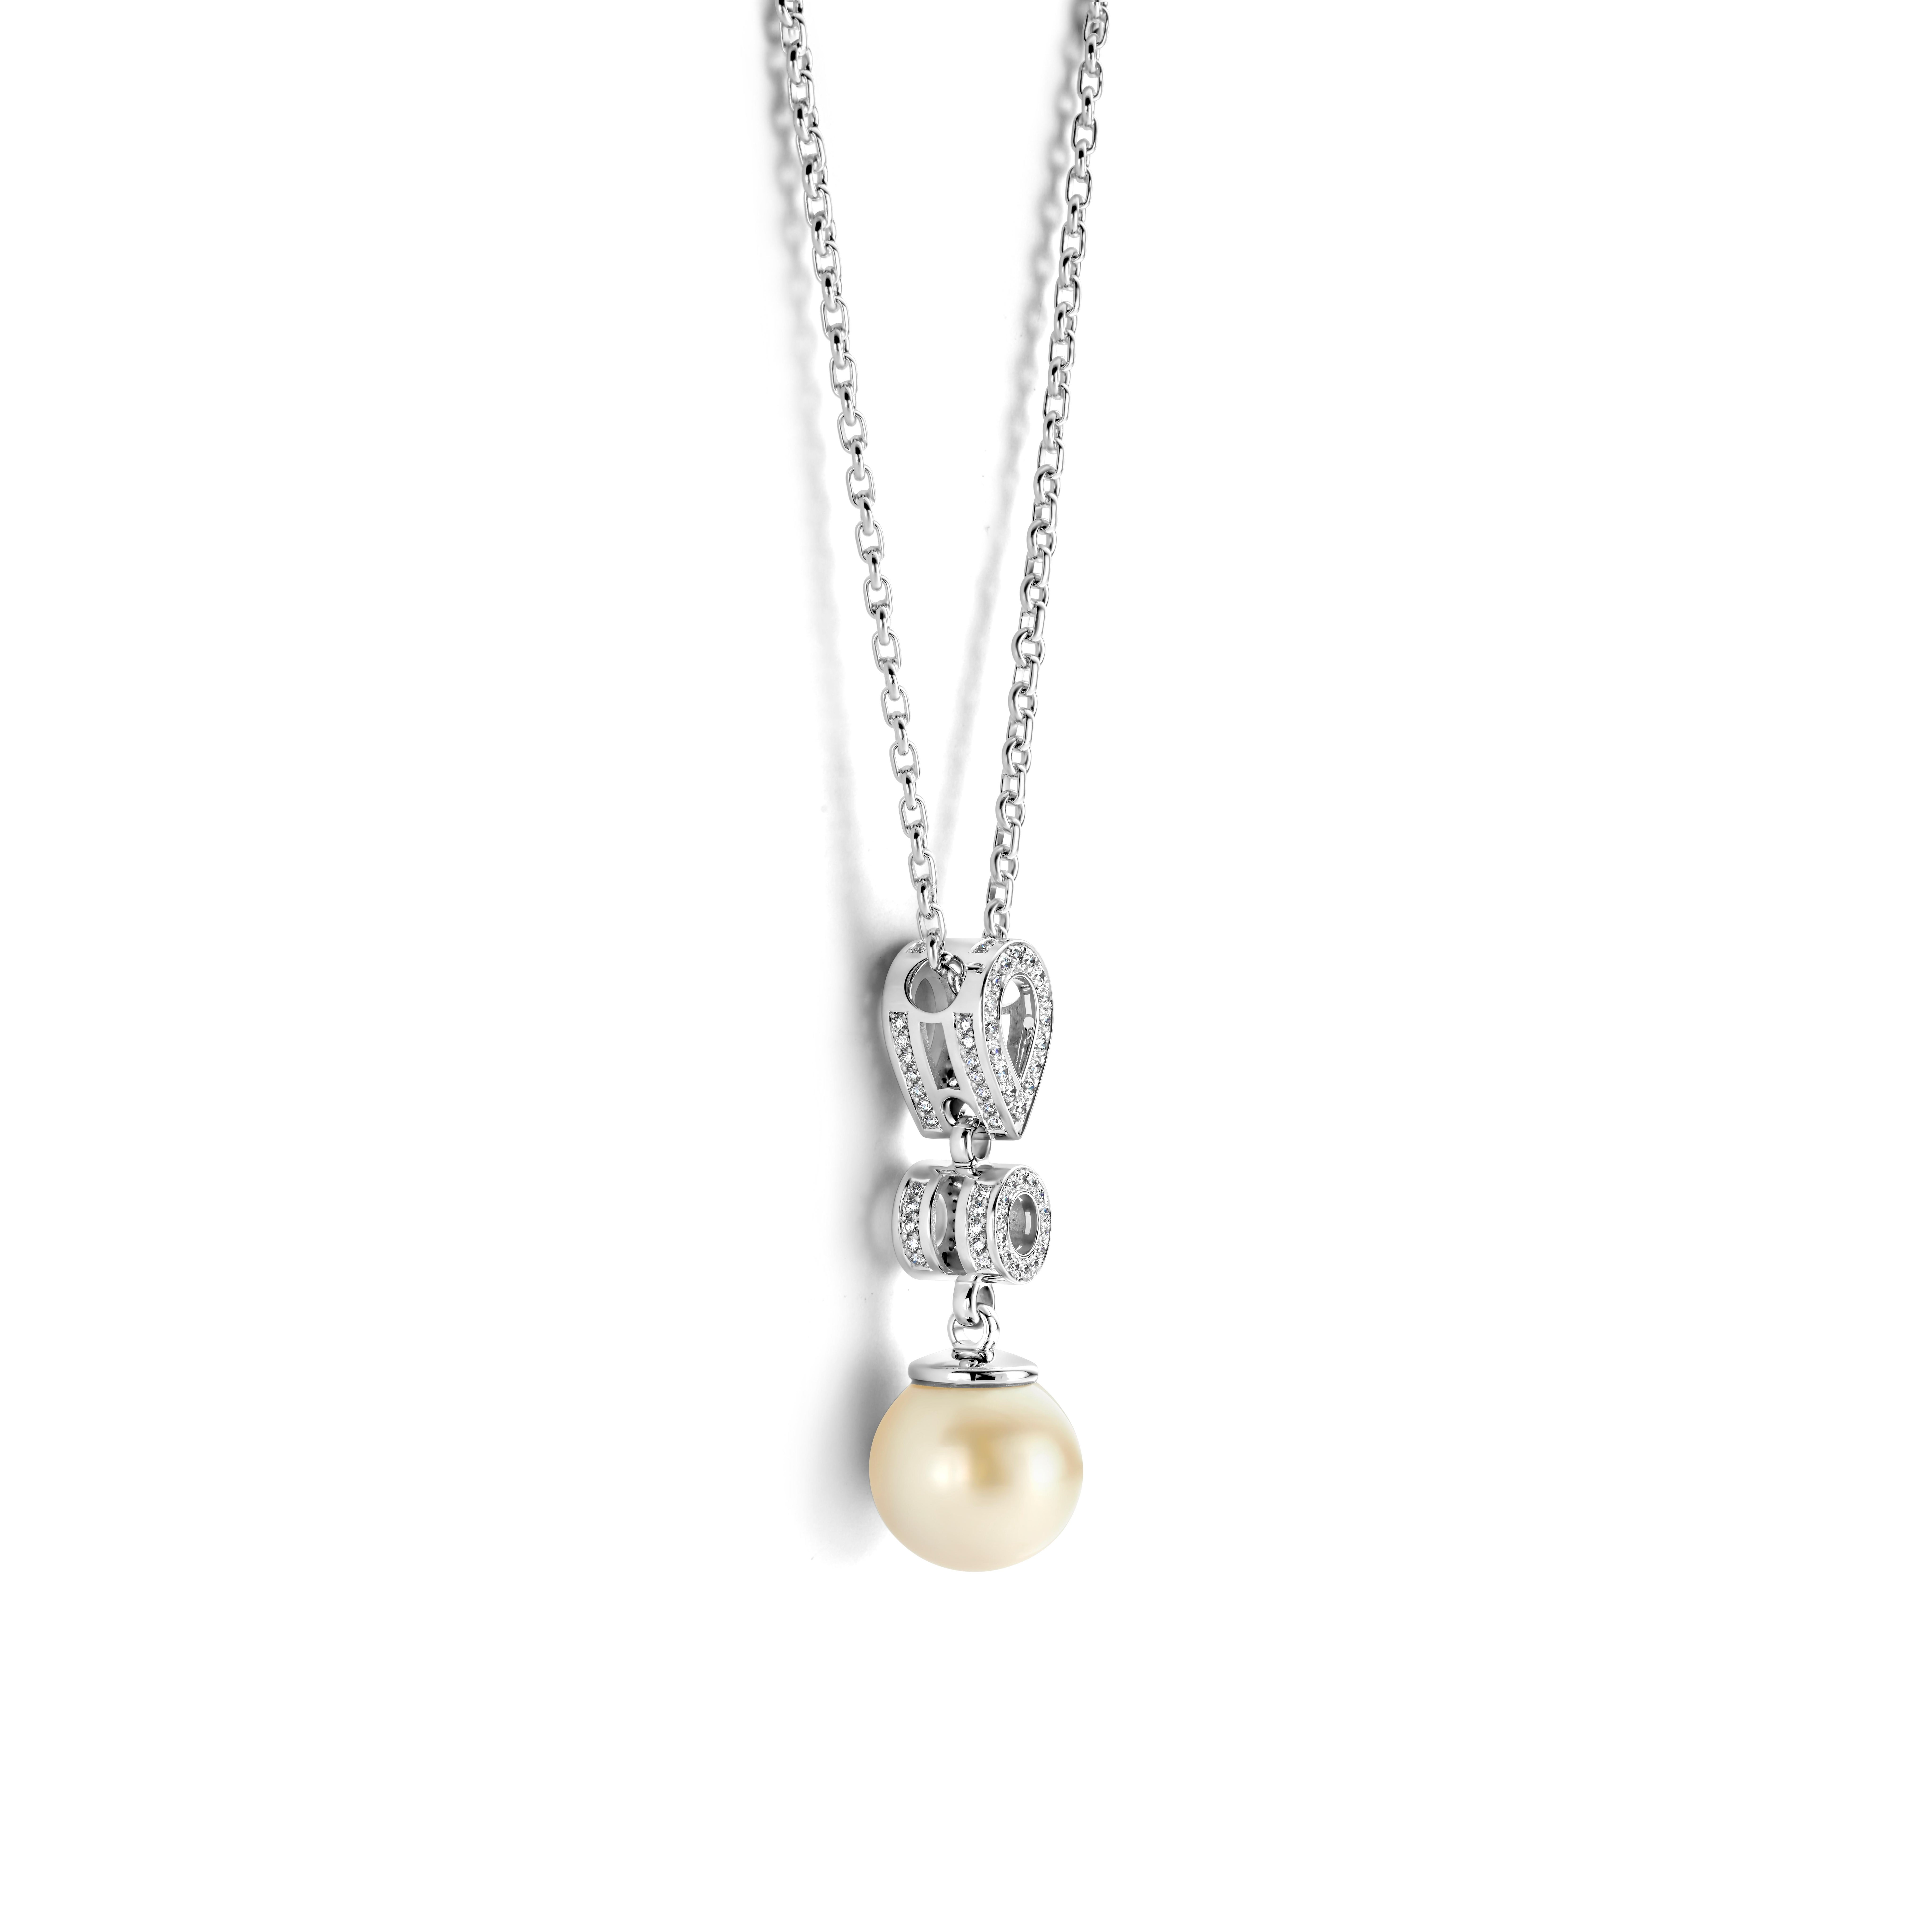 This exceptional One-of-a-kind statement piece pendant necklace in 18K white gold (30,4g) is set with the finest loop clean diamonds in brilliant cut 1.38Ct (D quality) and an extra large natural Australian south sea pearl of 17 mm with an